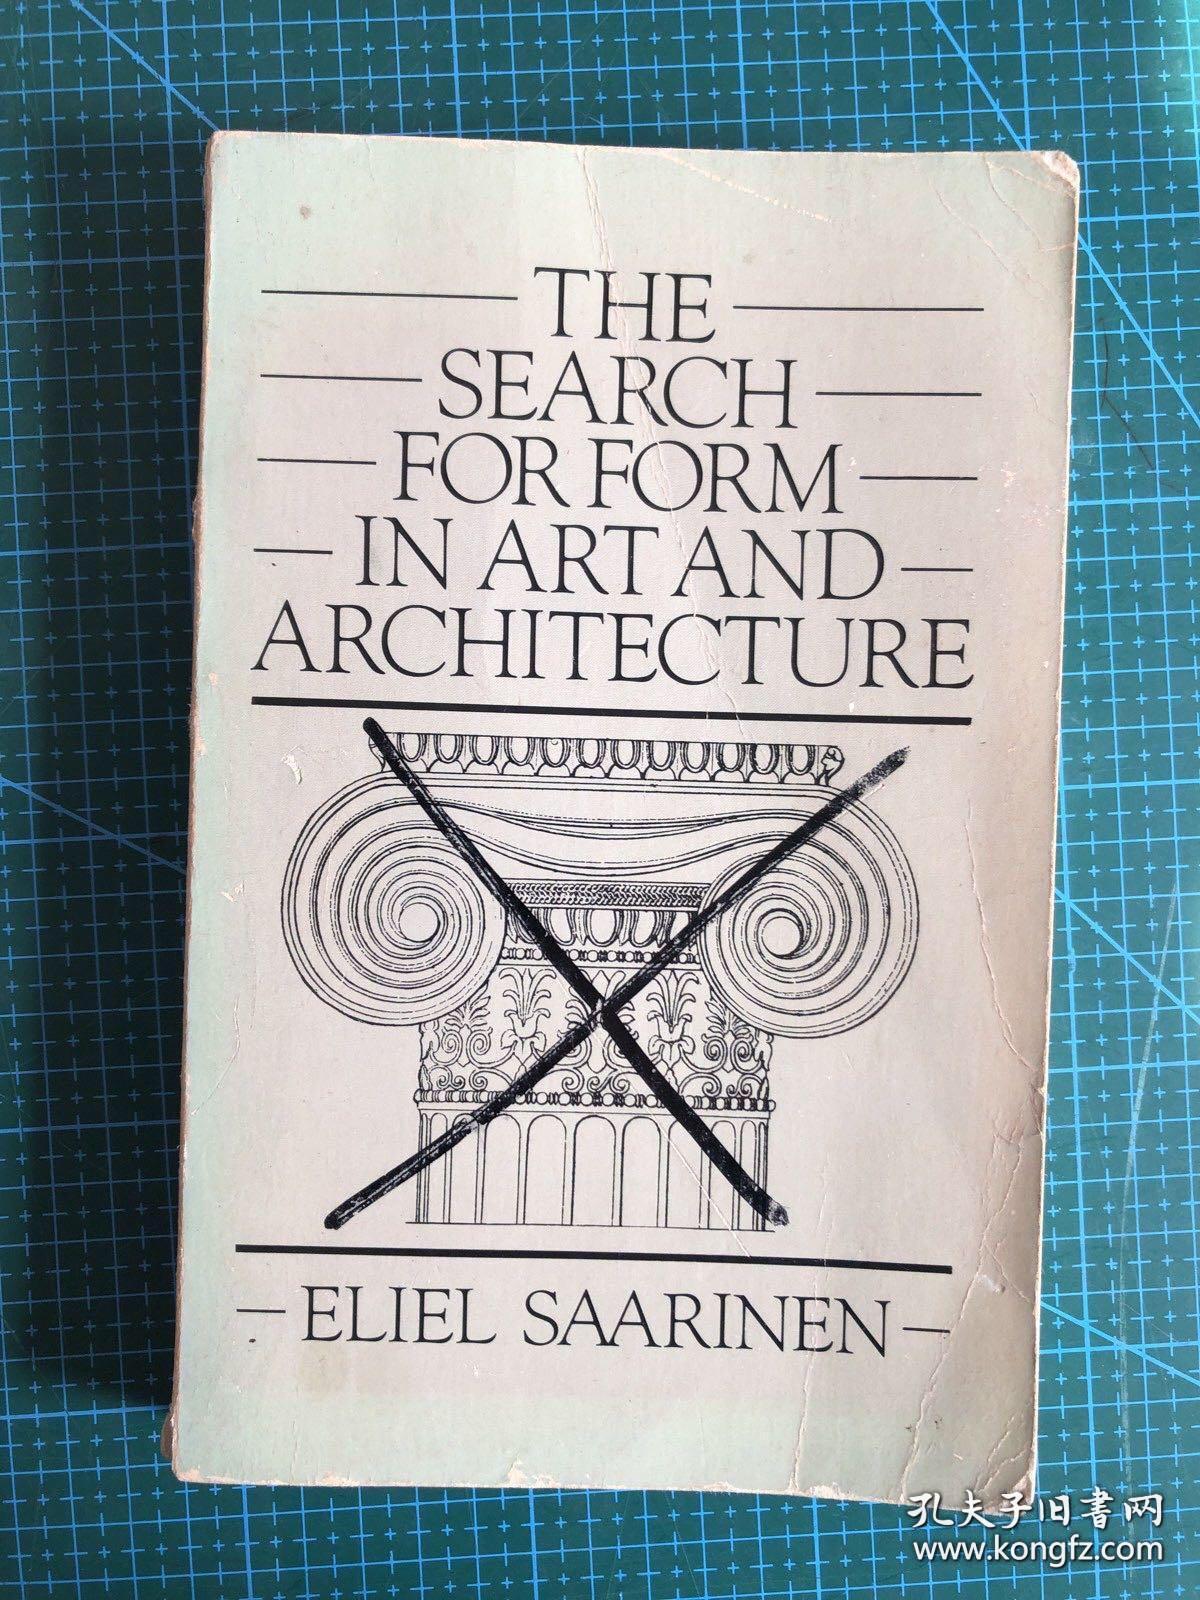 the search for form in art and architecture；作者：eliel saarinen